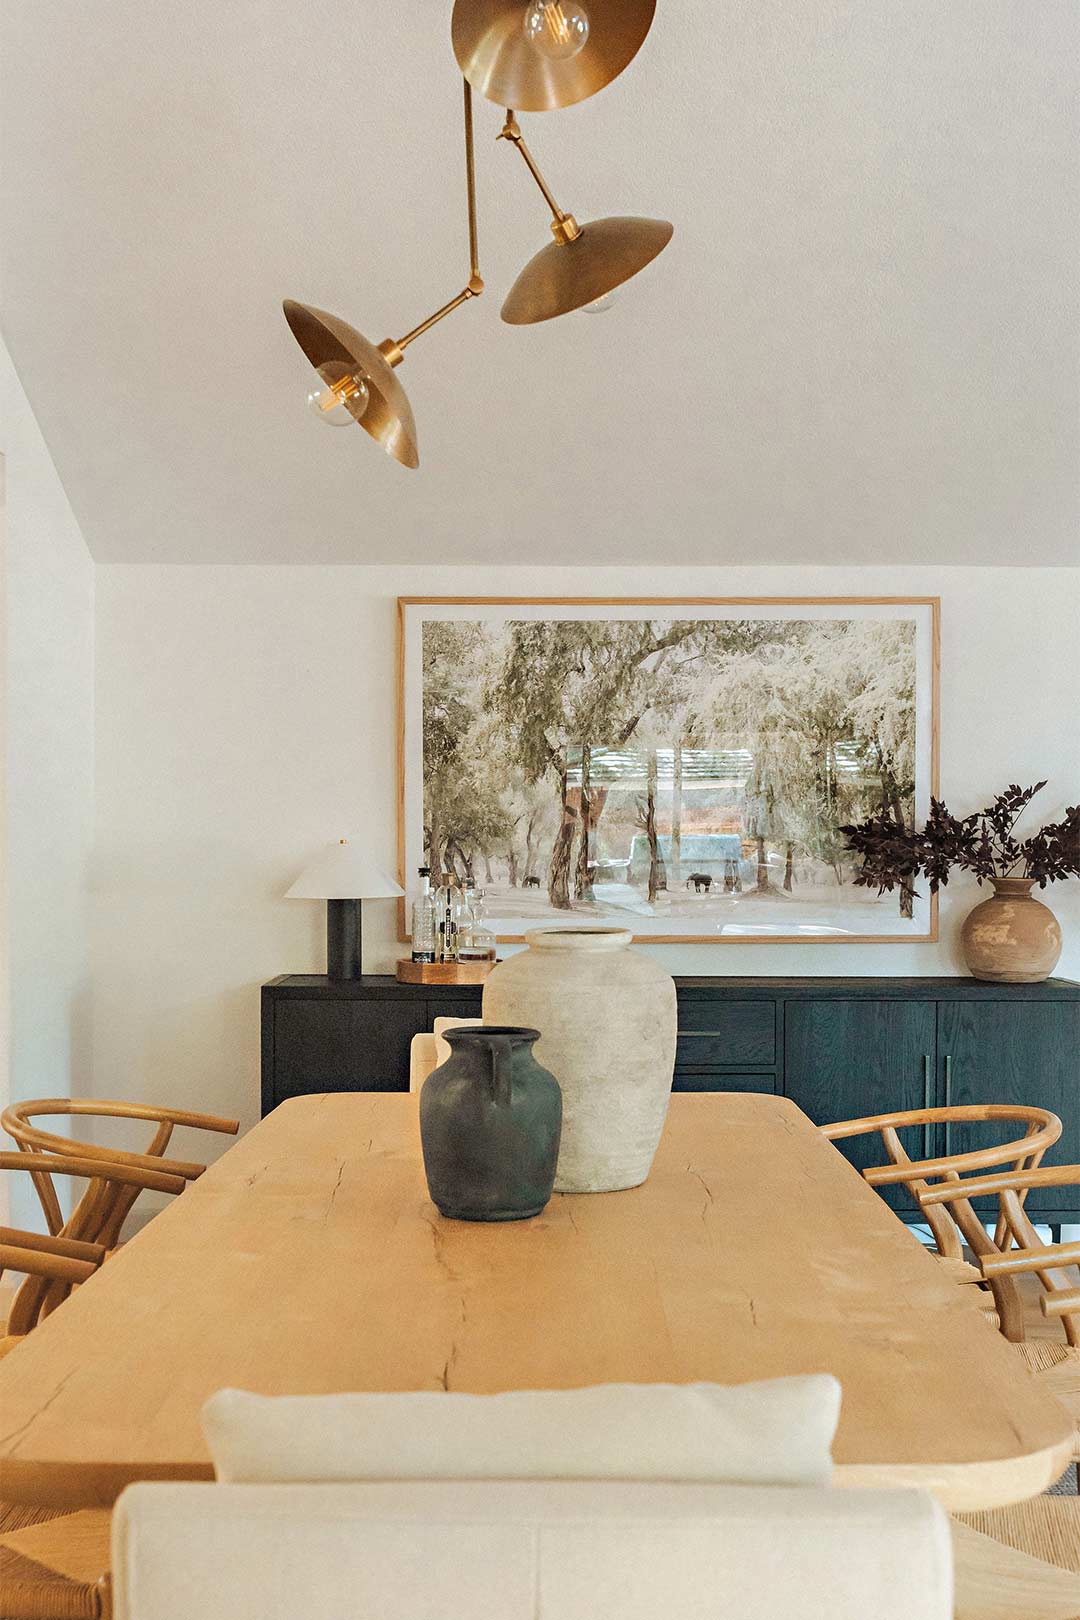 Domed Brass Pendant Lights and South African art  bring natural textures to this Modern Eclectic dining table